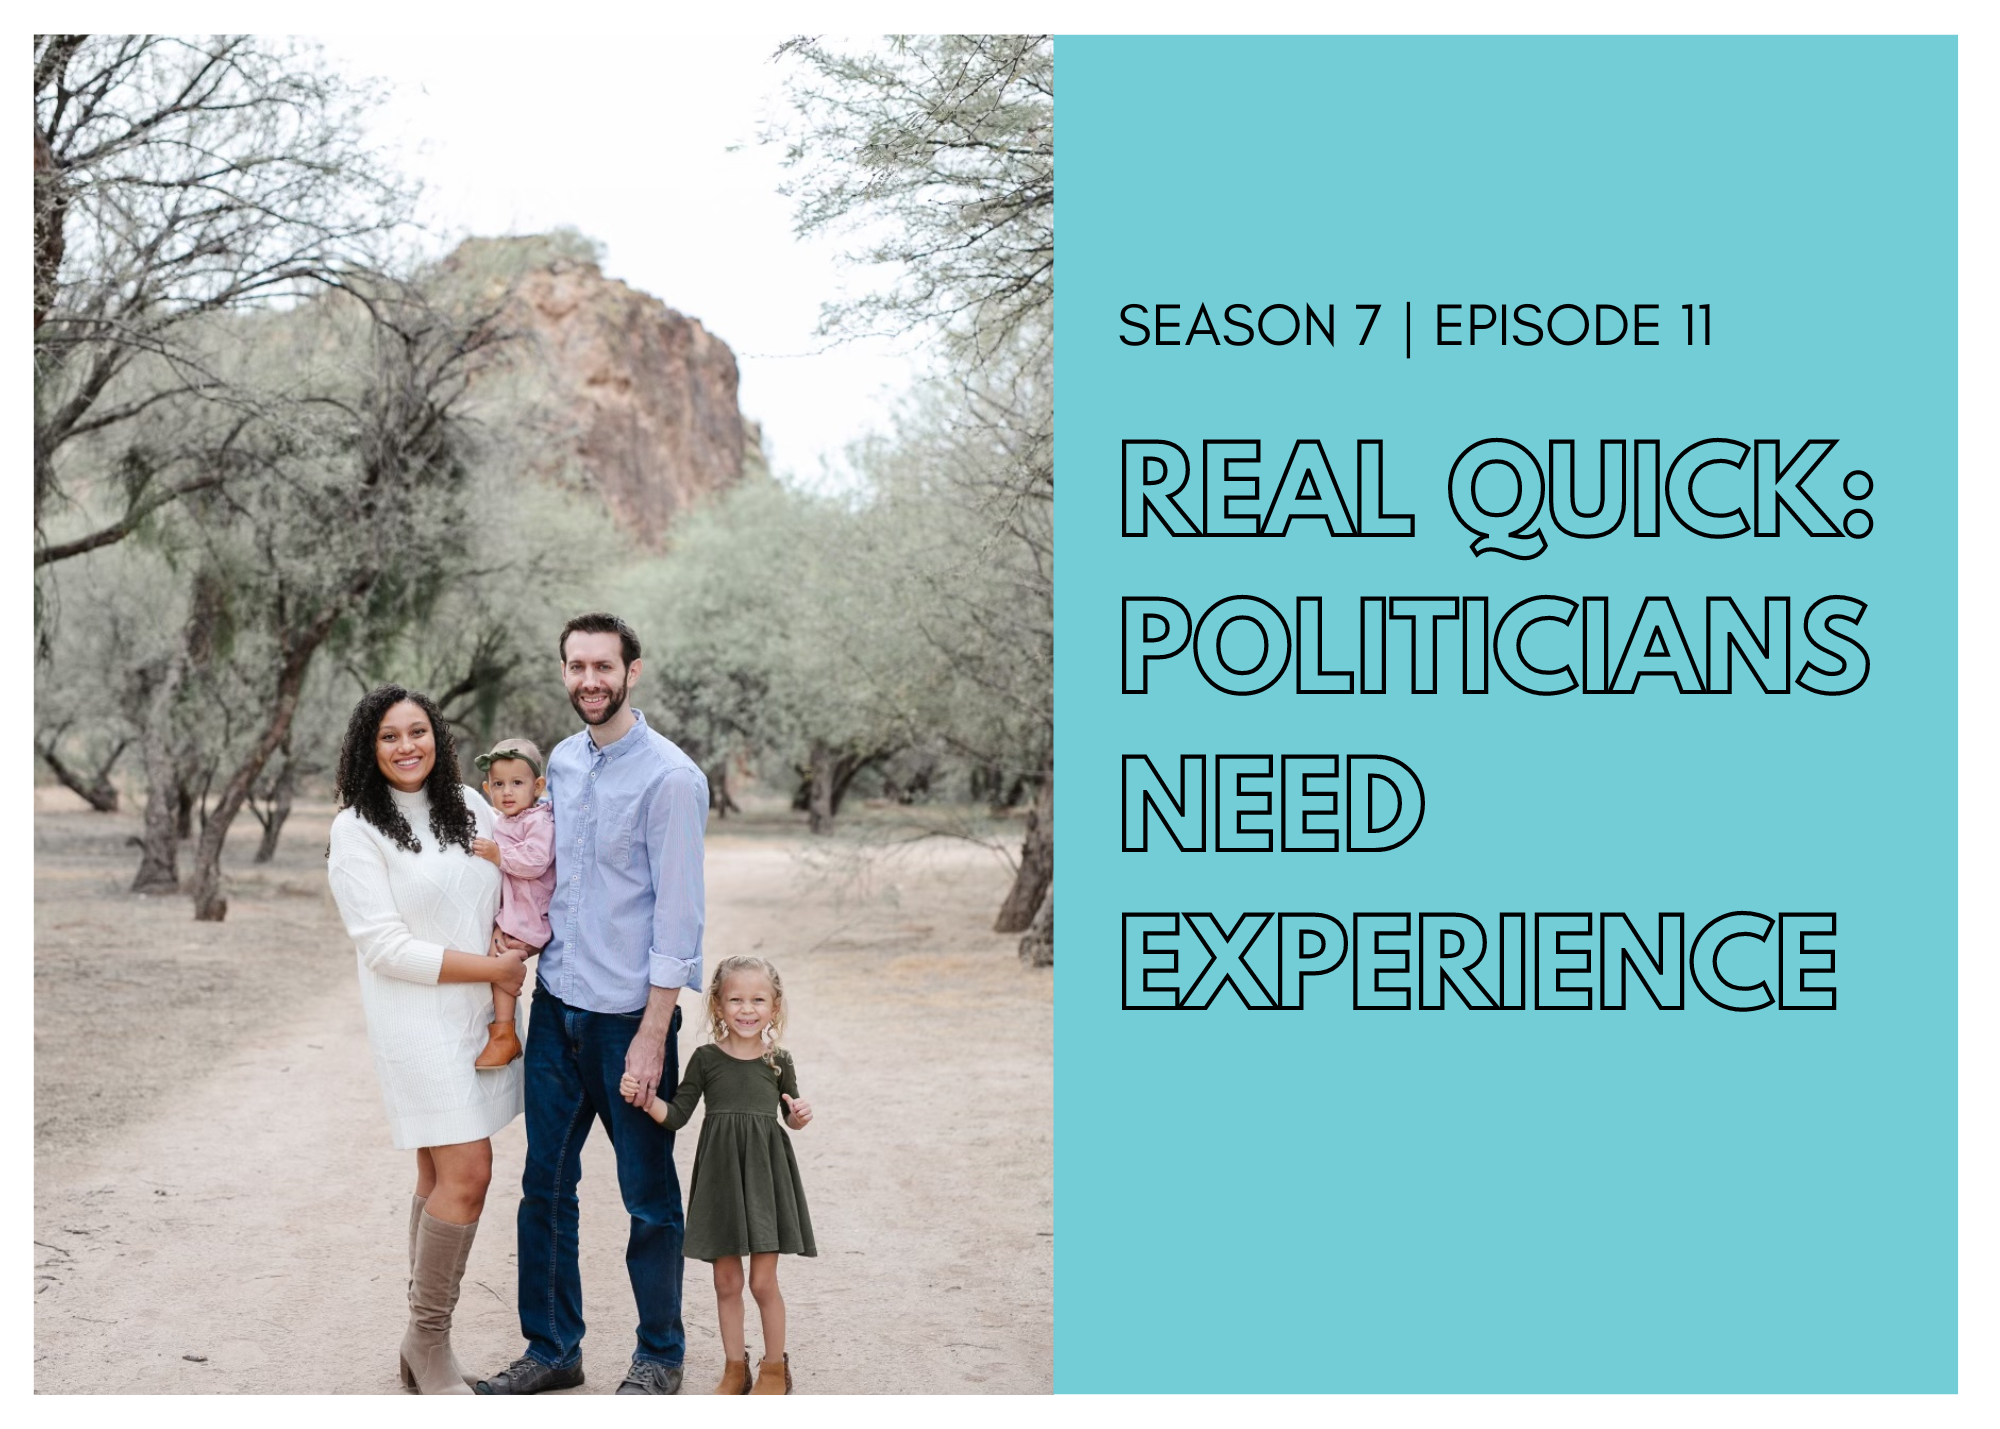 Real Quick: Politicians Need Experience